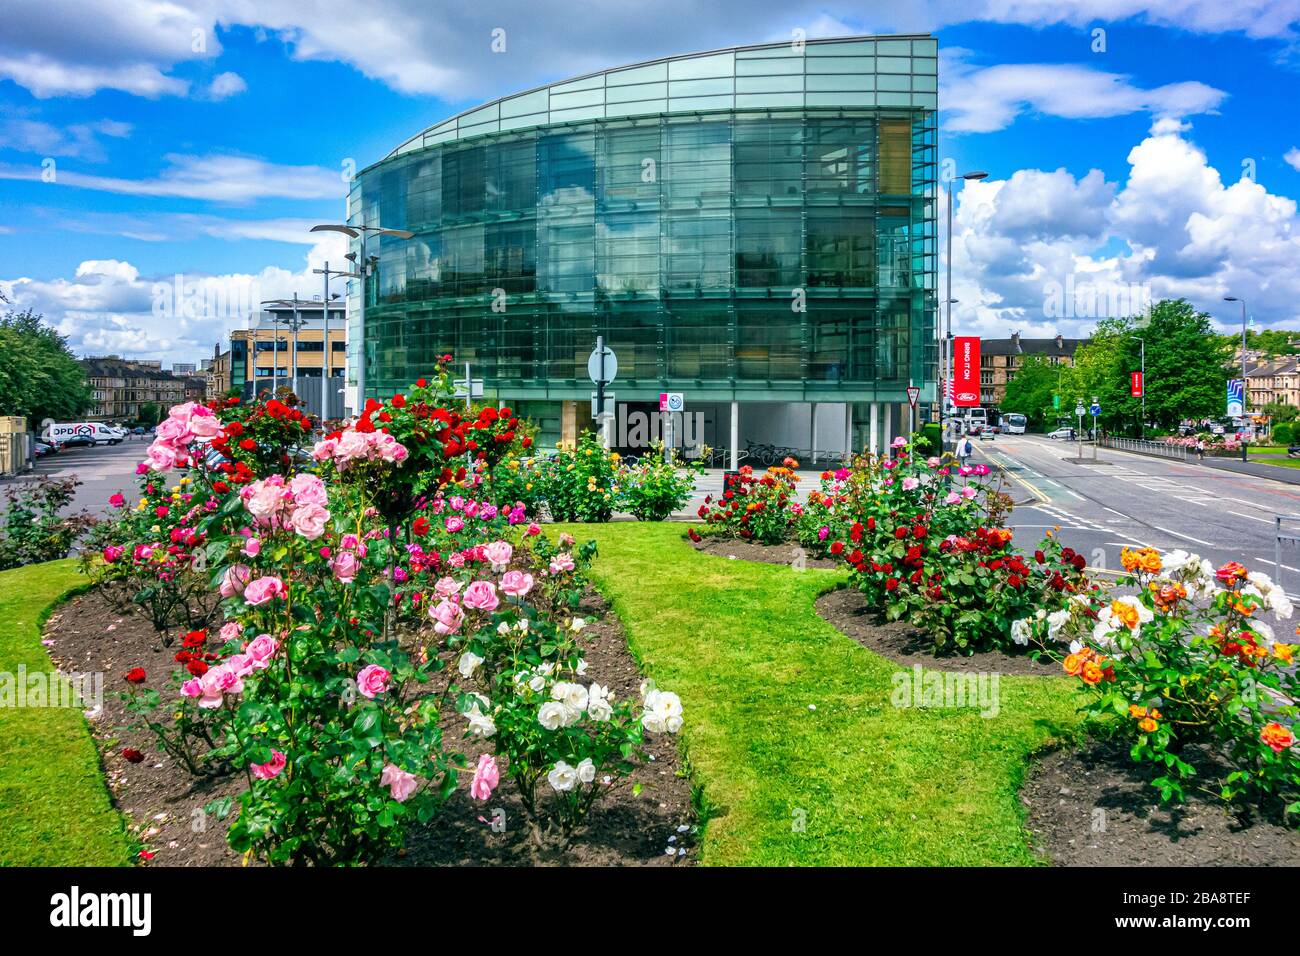 The Wolfson Medical School building on the University of Glasgow campus in western Glasgow Scotland Stock Photo